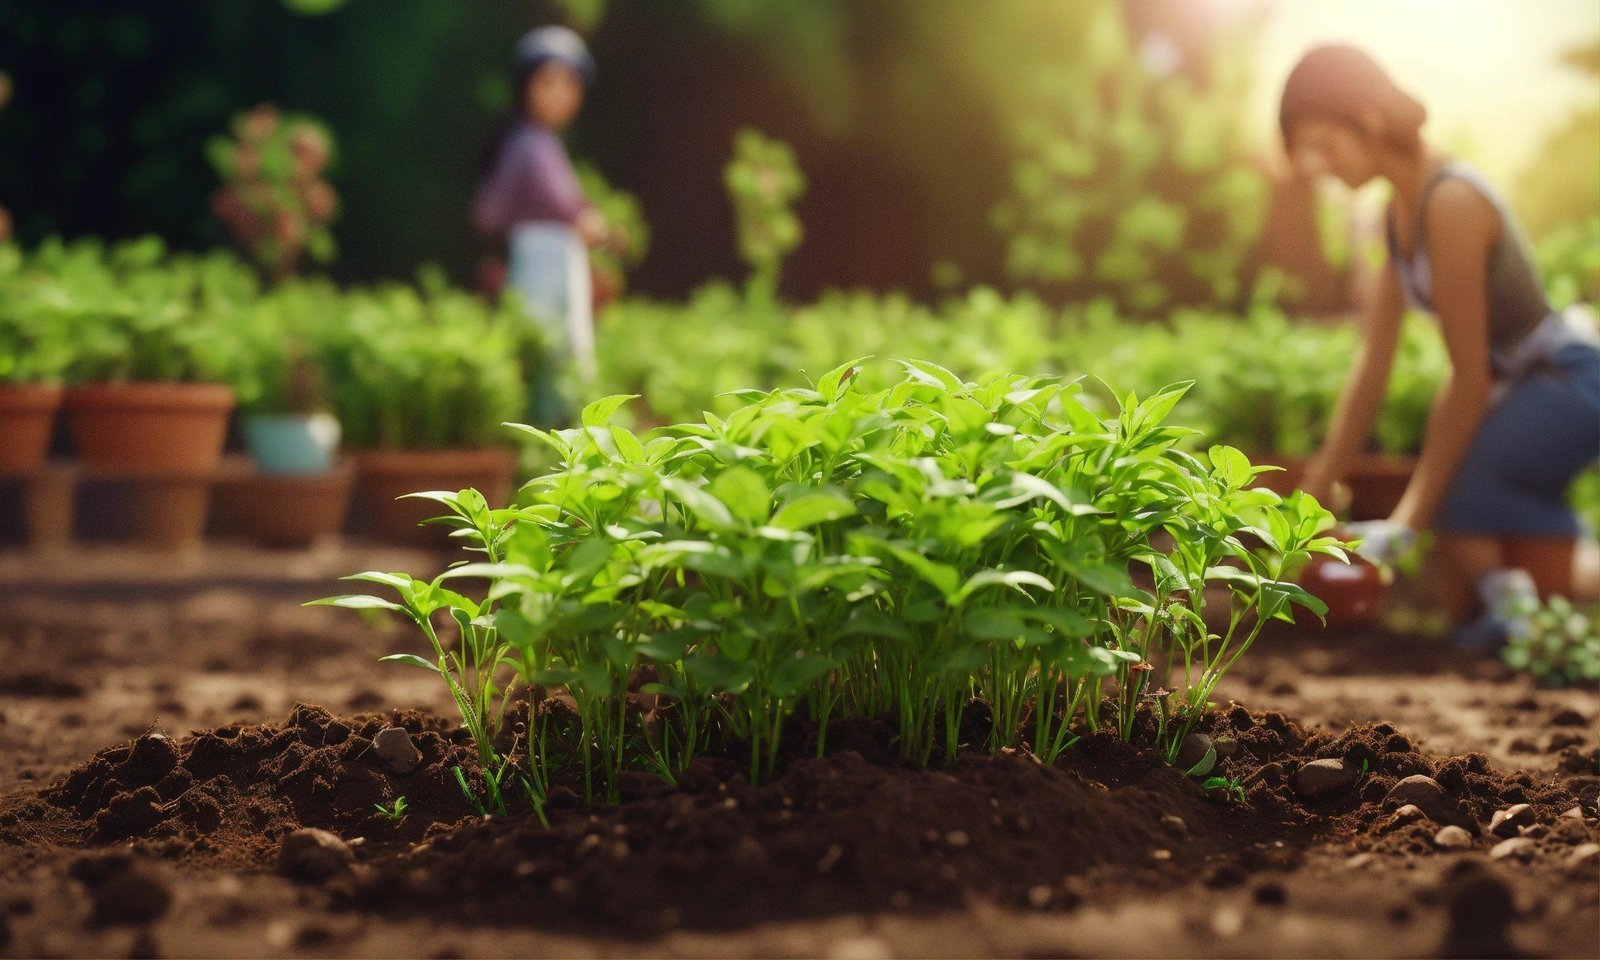 Non-toxic weed control options for organic gardens